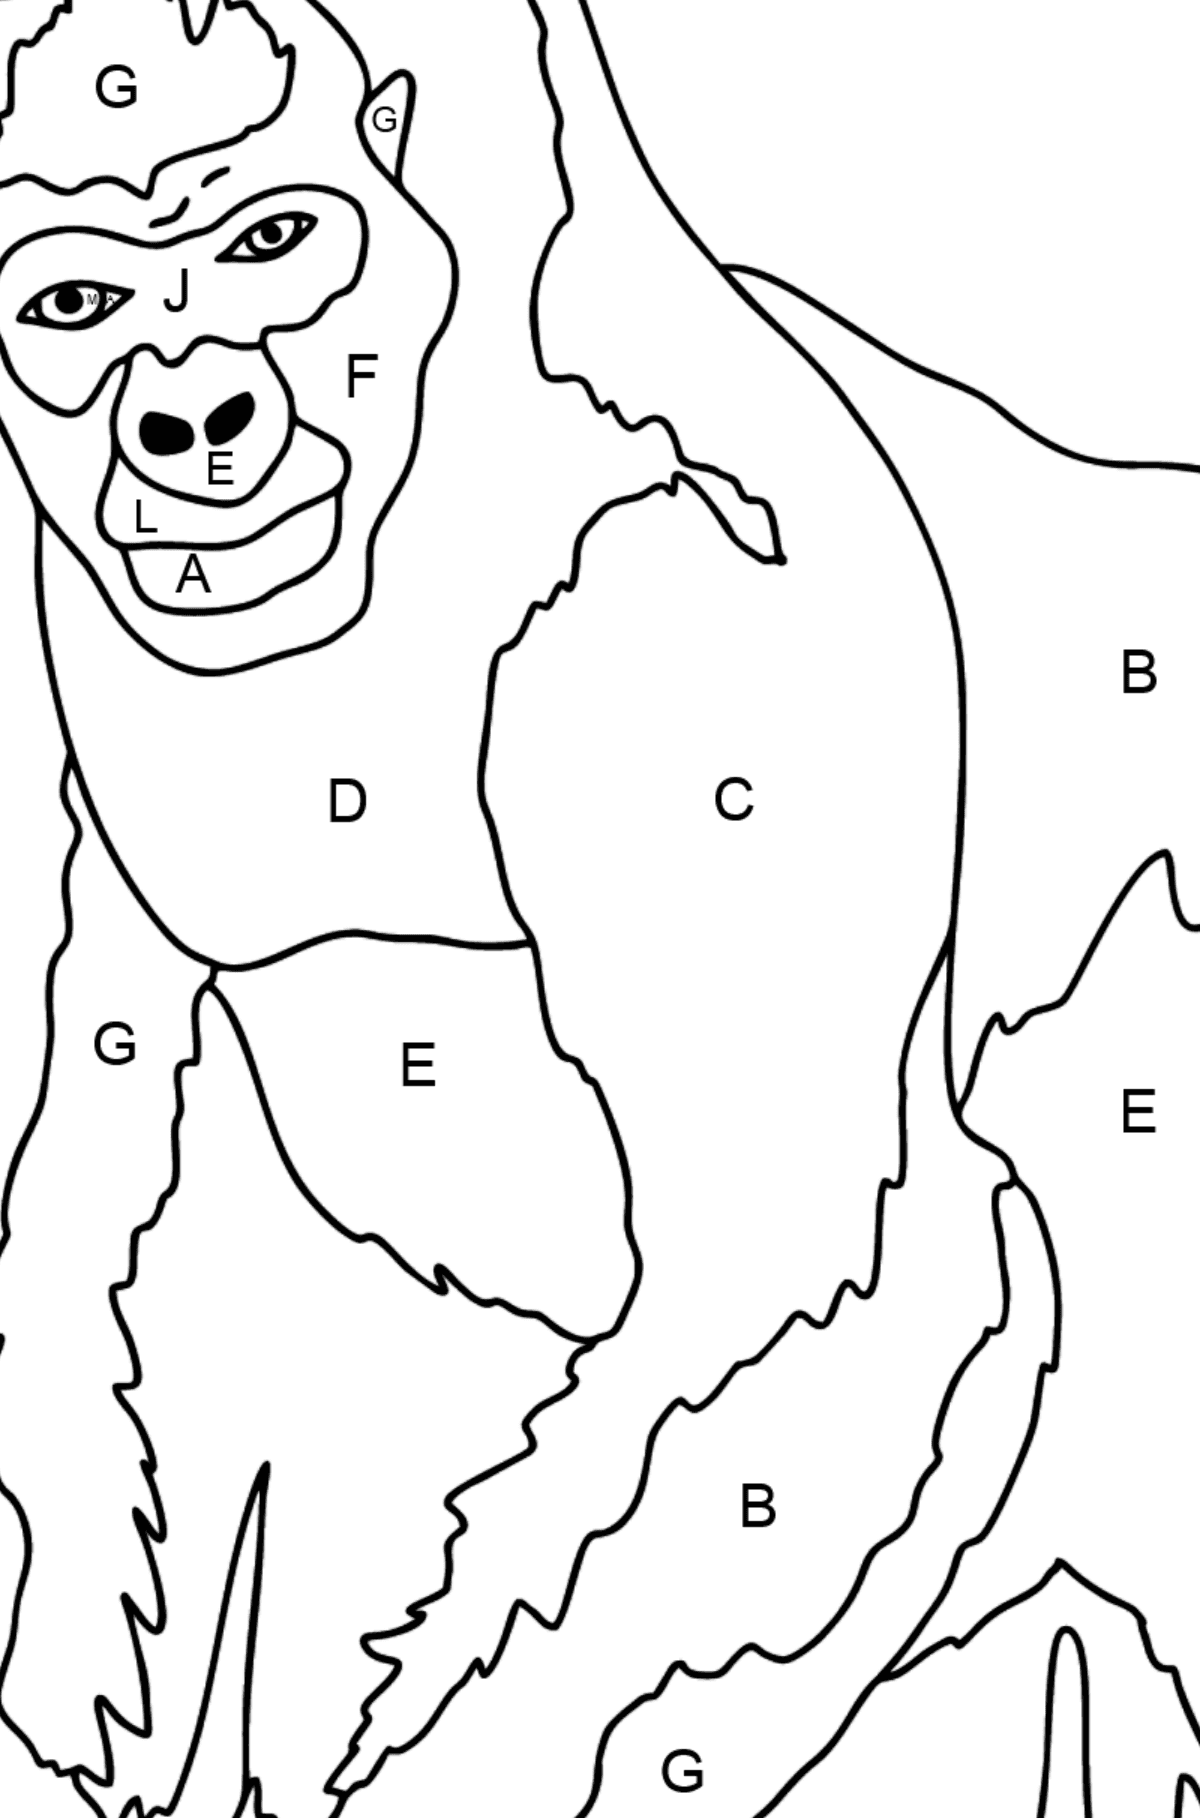 Coloring Page - A Hairy Gorilla - Coloring by Letters for Kids